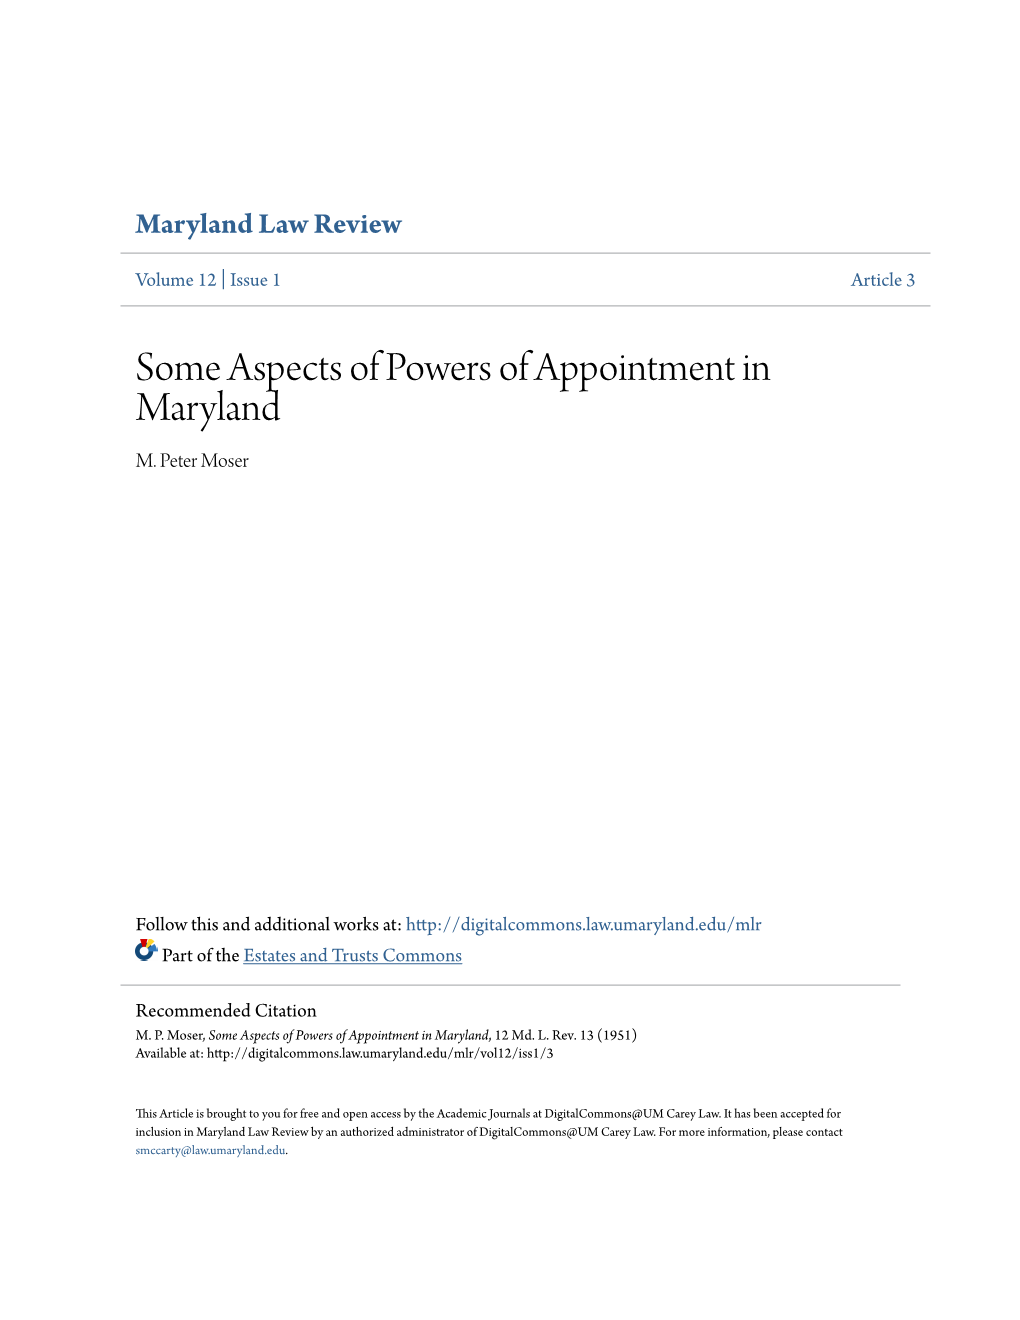 Some Aspects of Powers of Appointment in Maryland M